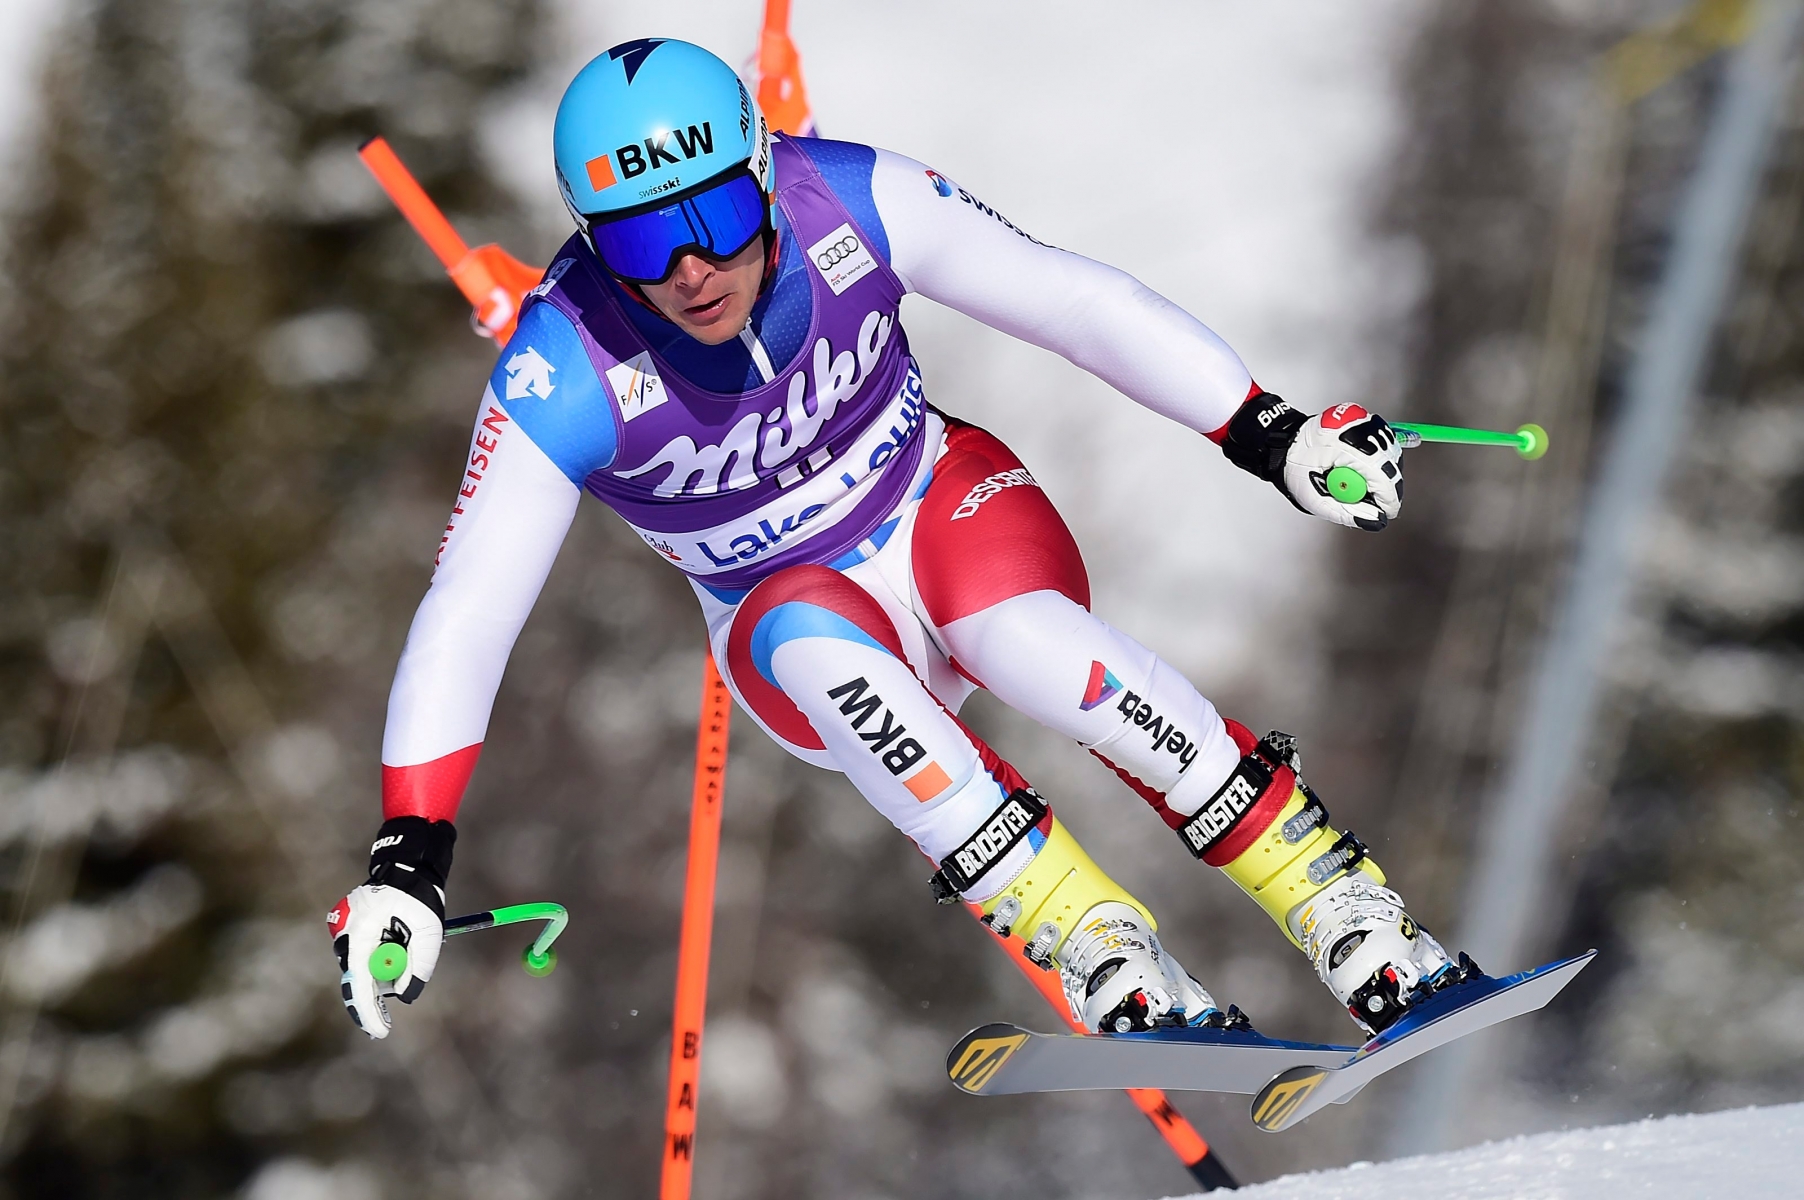 Patrick Kueng, of Switzerland, skis during a training run at the men's World Cup downhill in Lake Louise, Alberta, Wednesday, Nov. 25, 2015. (Frank Gunn/The Canadian Press via AP) Canada WCup Lake Louise Skiing